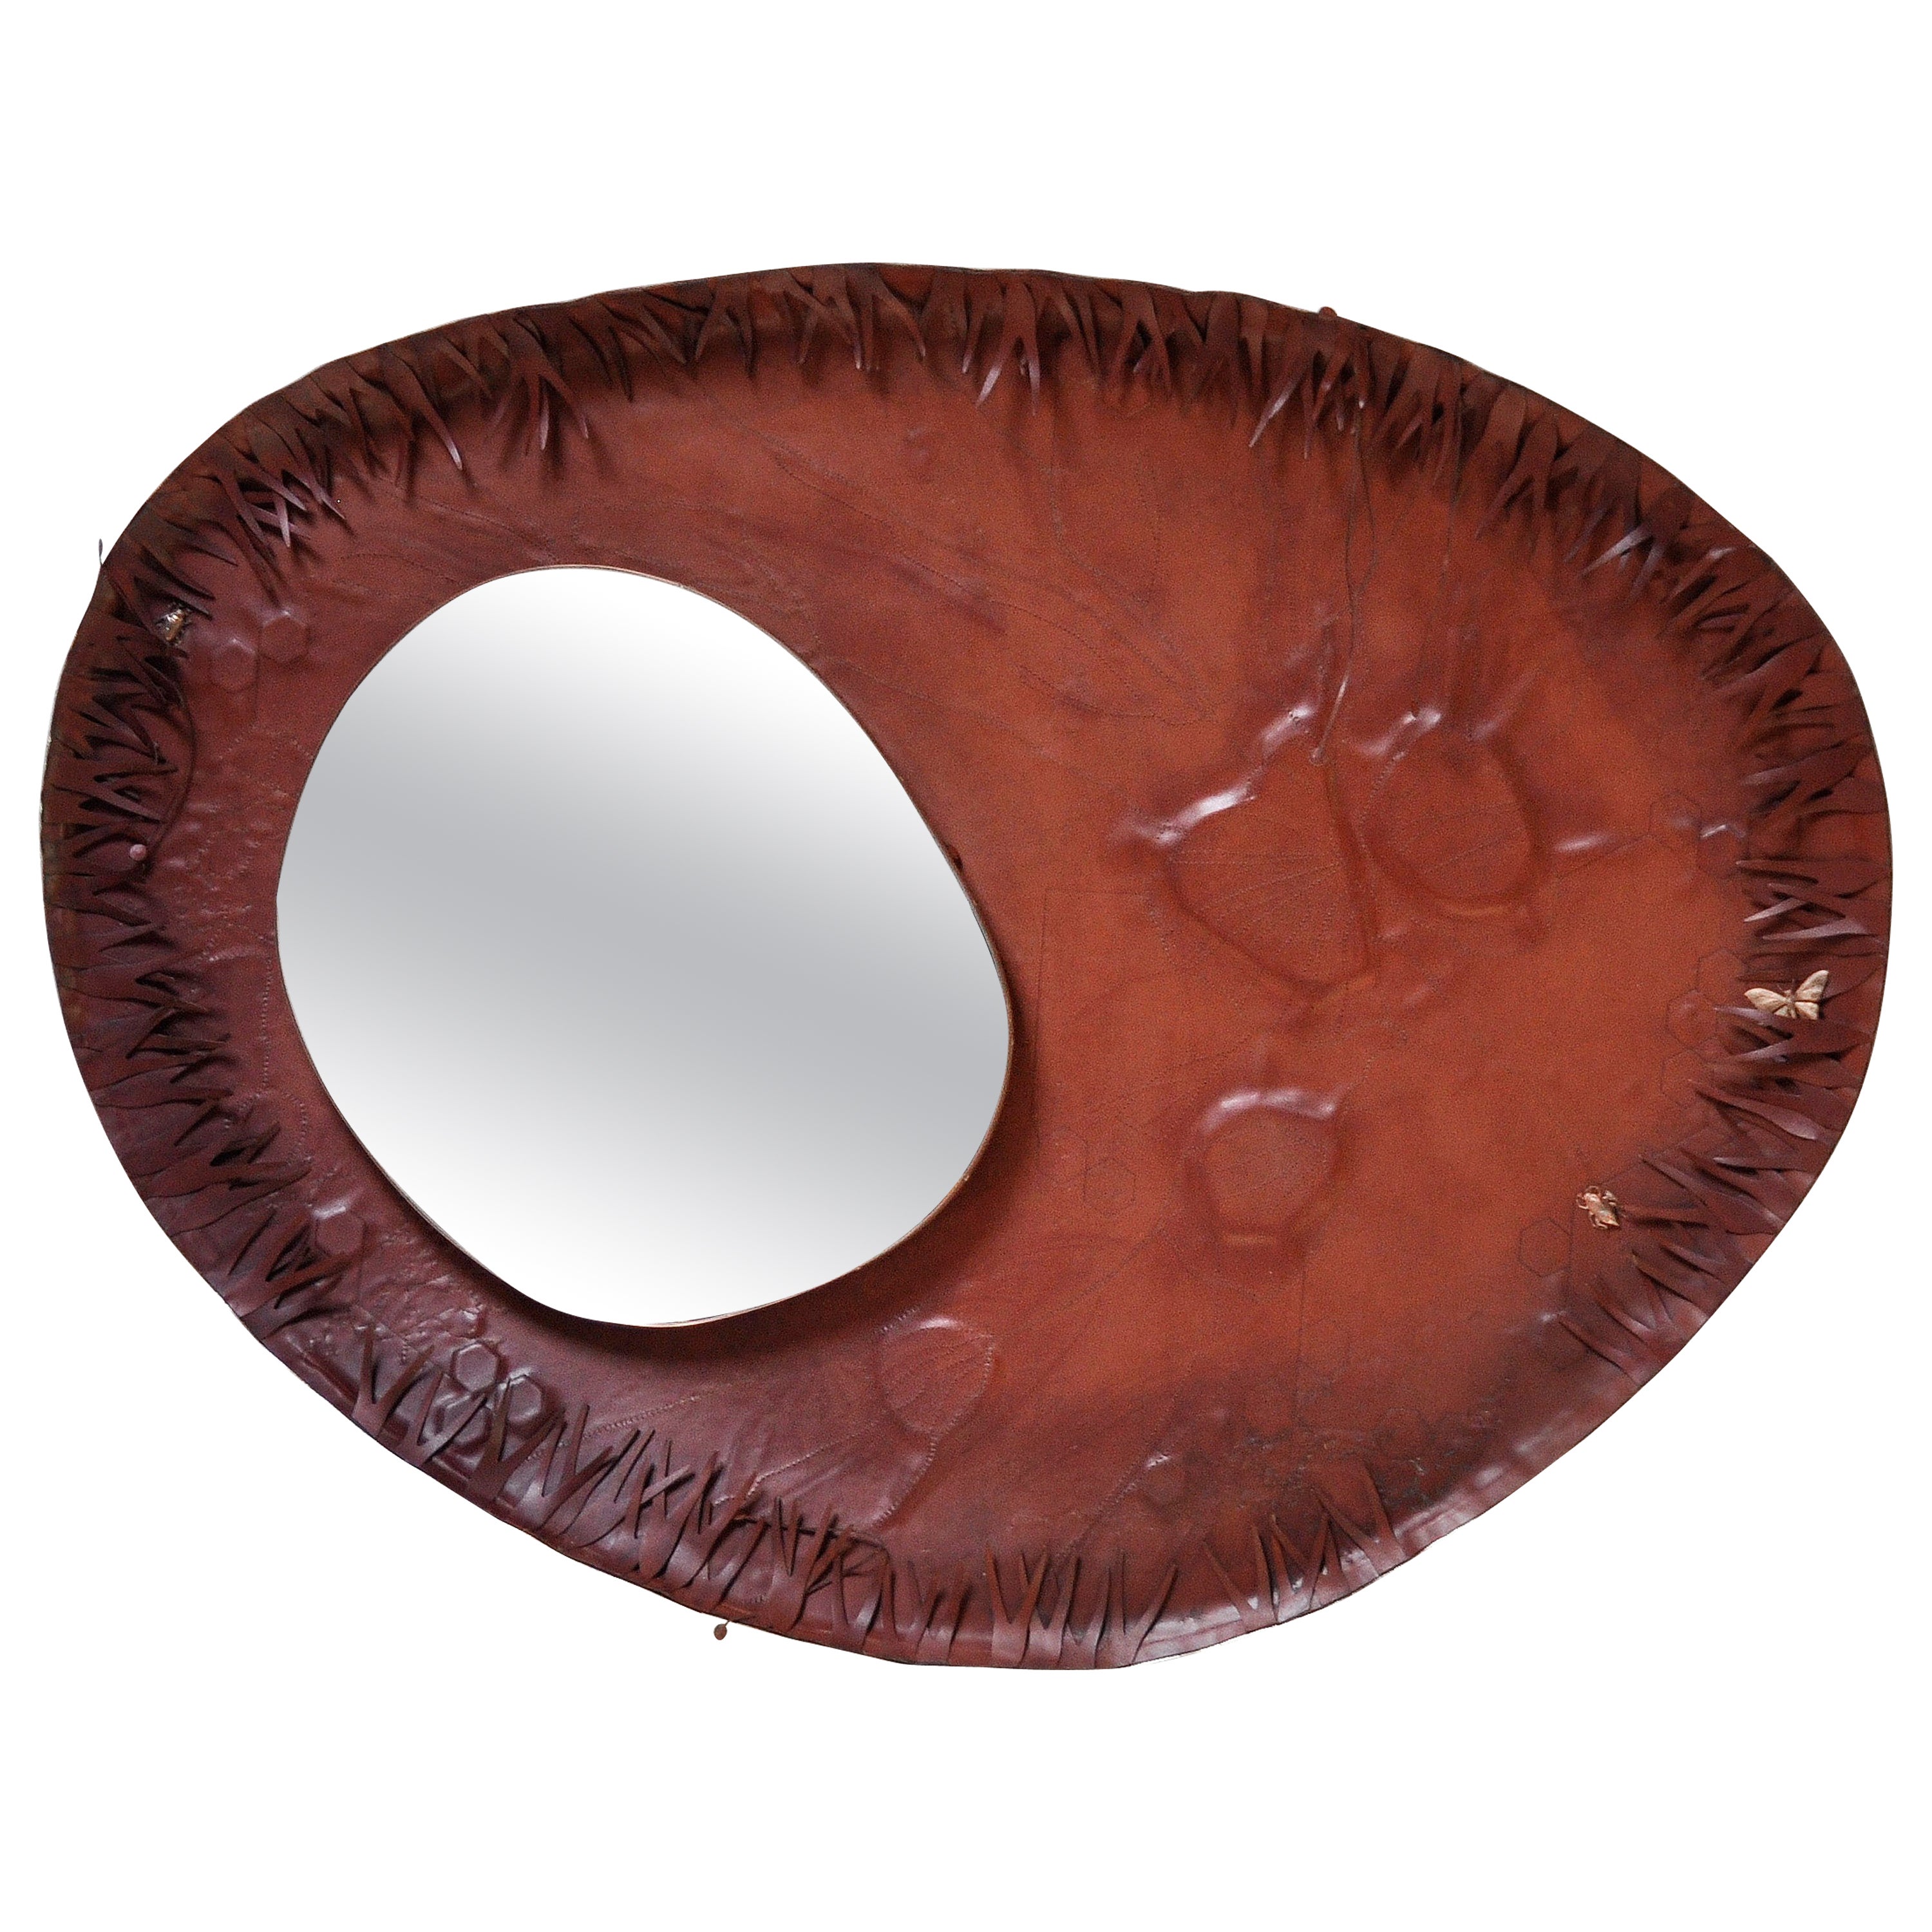 Sculptural Free Form Leather Mirror, France, 1990s